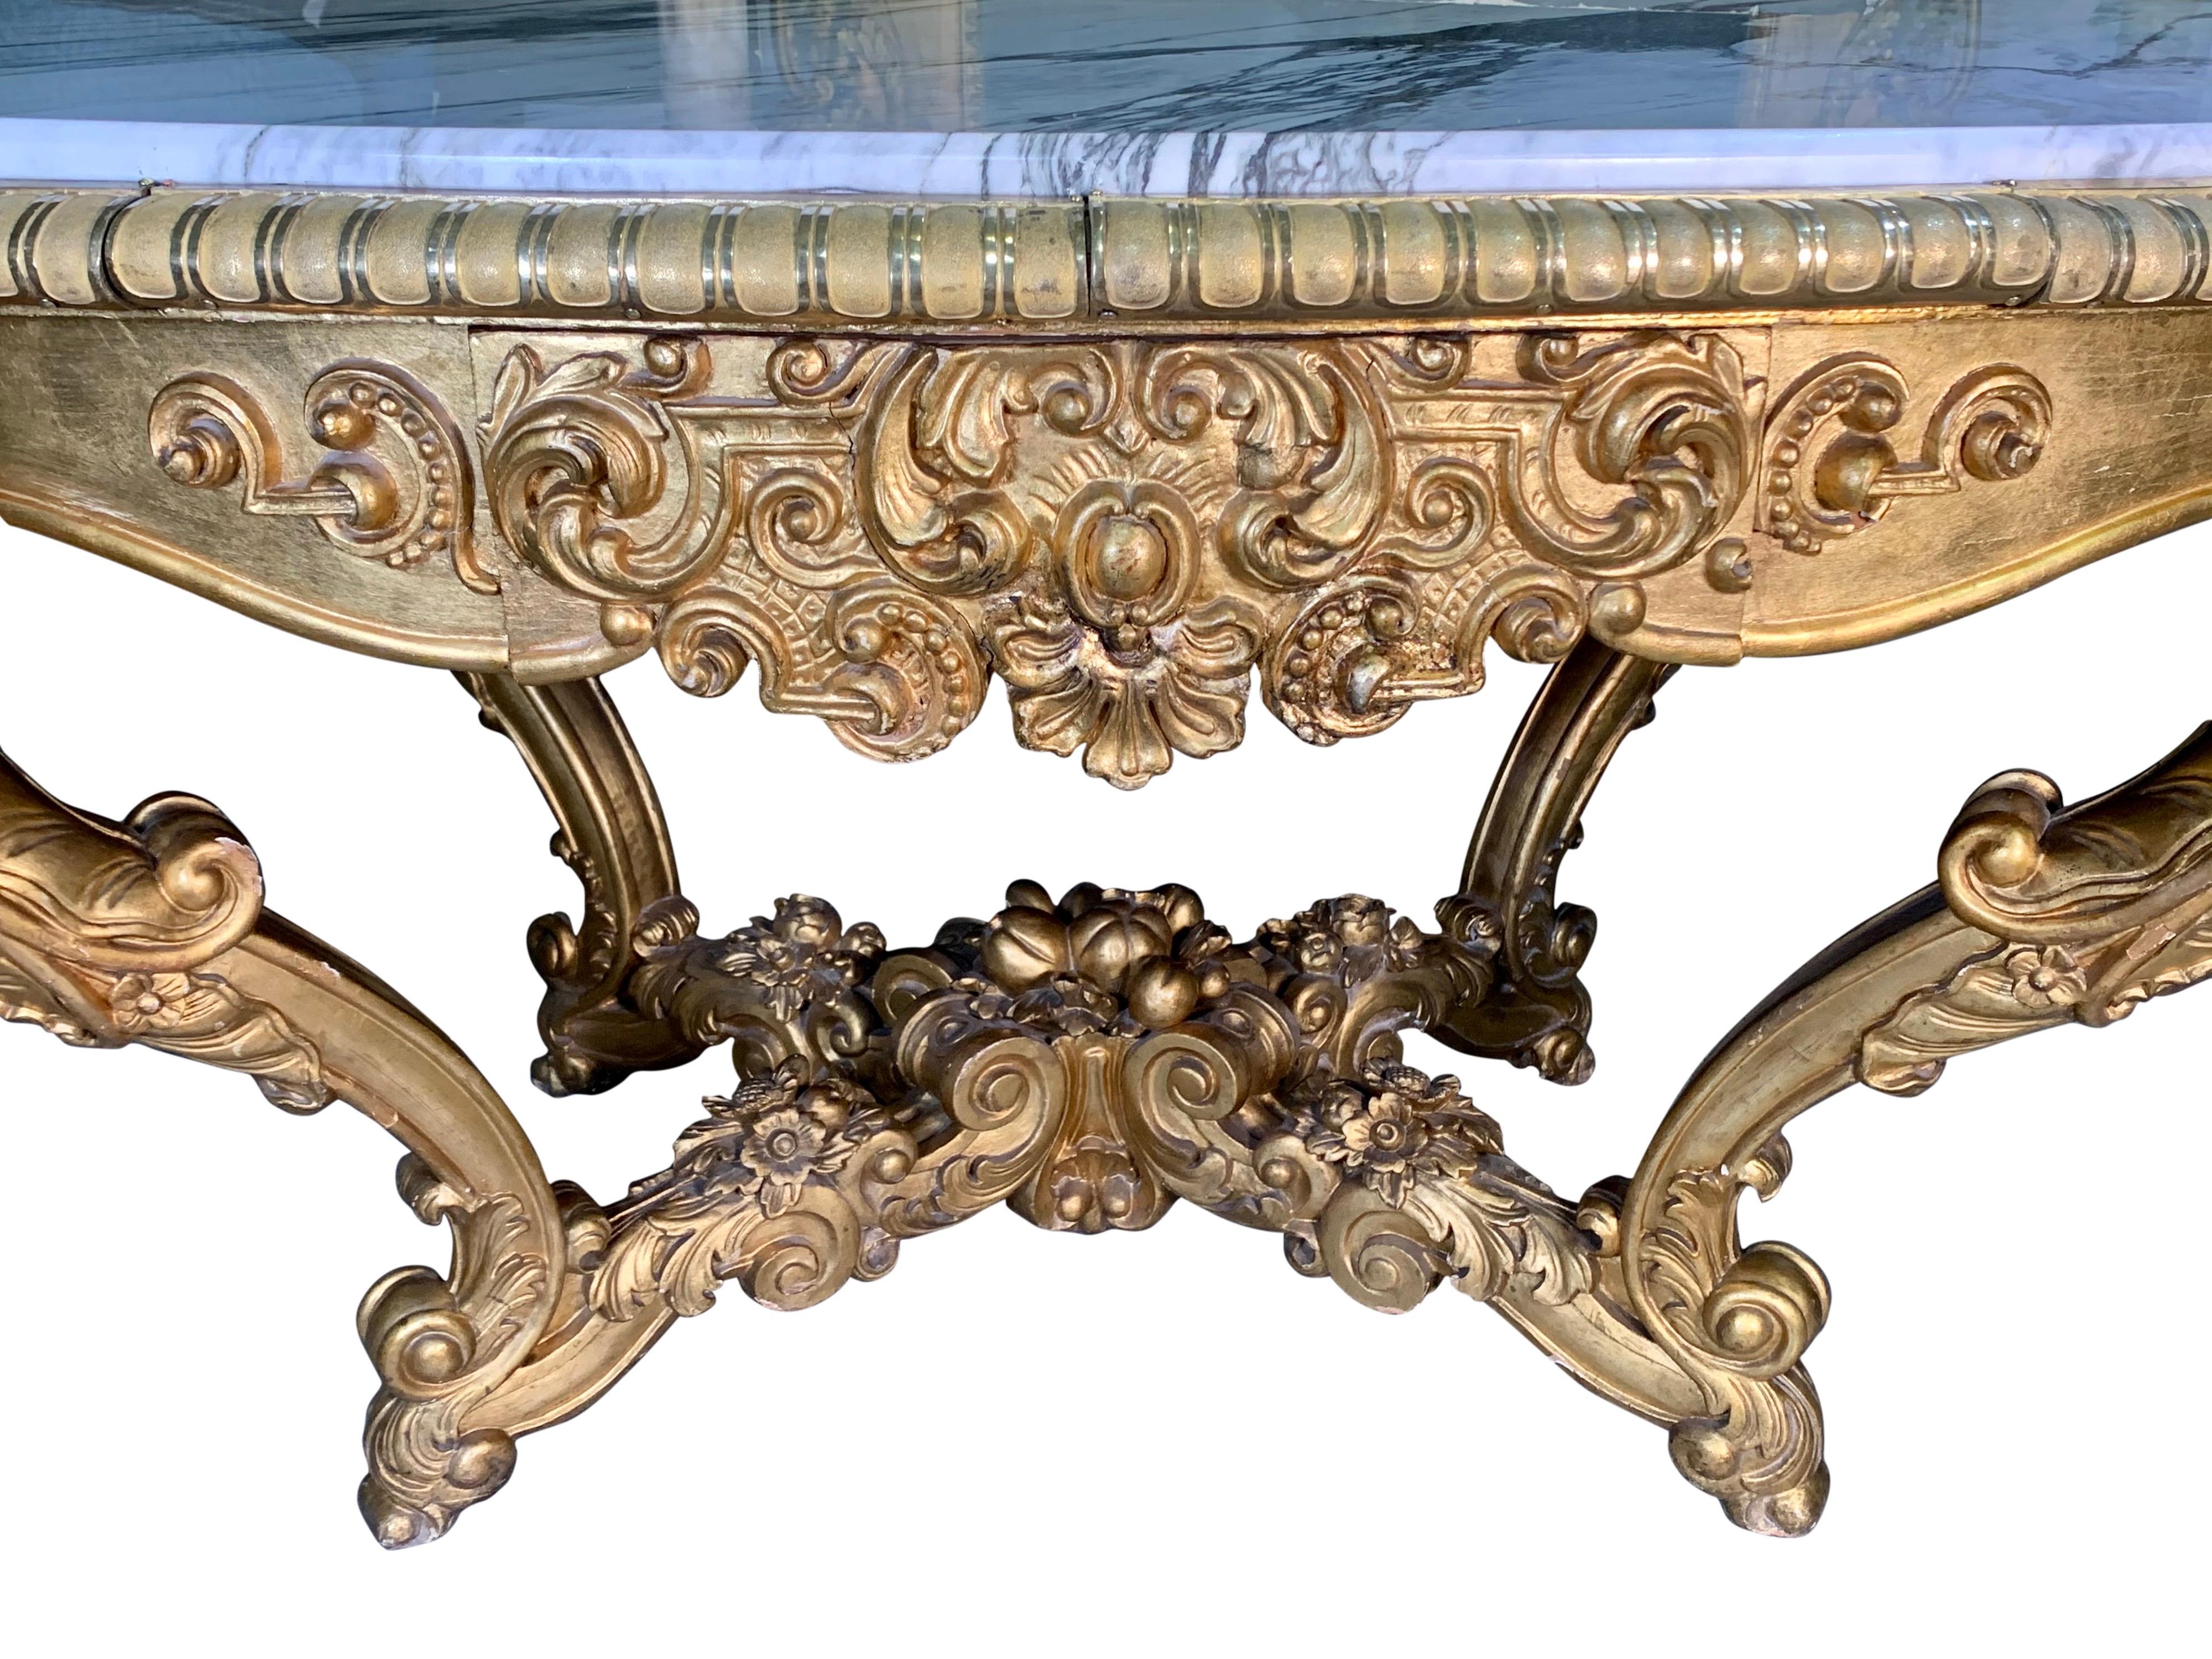 A stunning 19th century continental Rococo style oval hand carved giltwood and marble top center table with a single drawer. This large table is raised on four elegant cabriole legs joined by a stretcher with carved leaves flowers and fruits. The